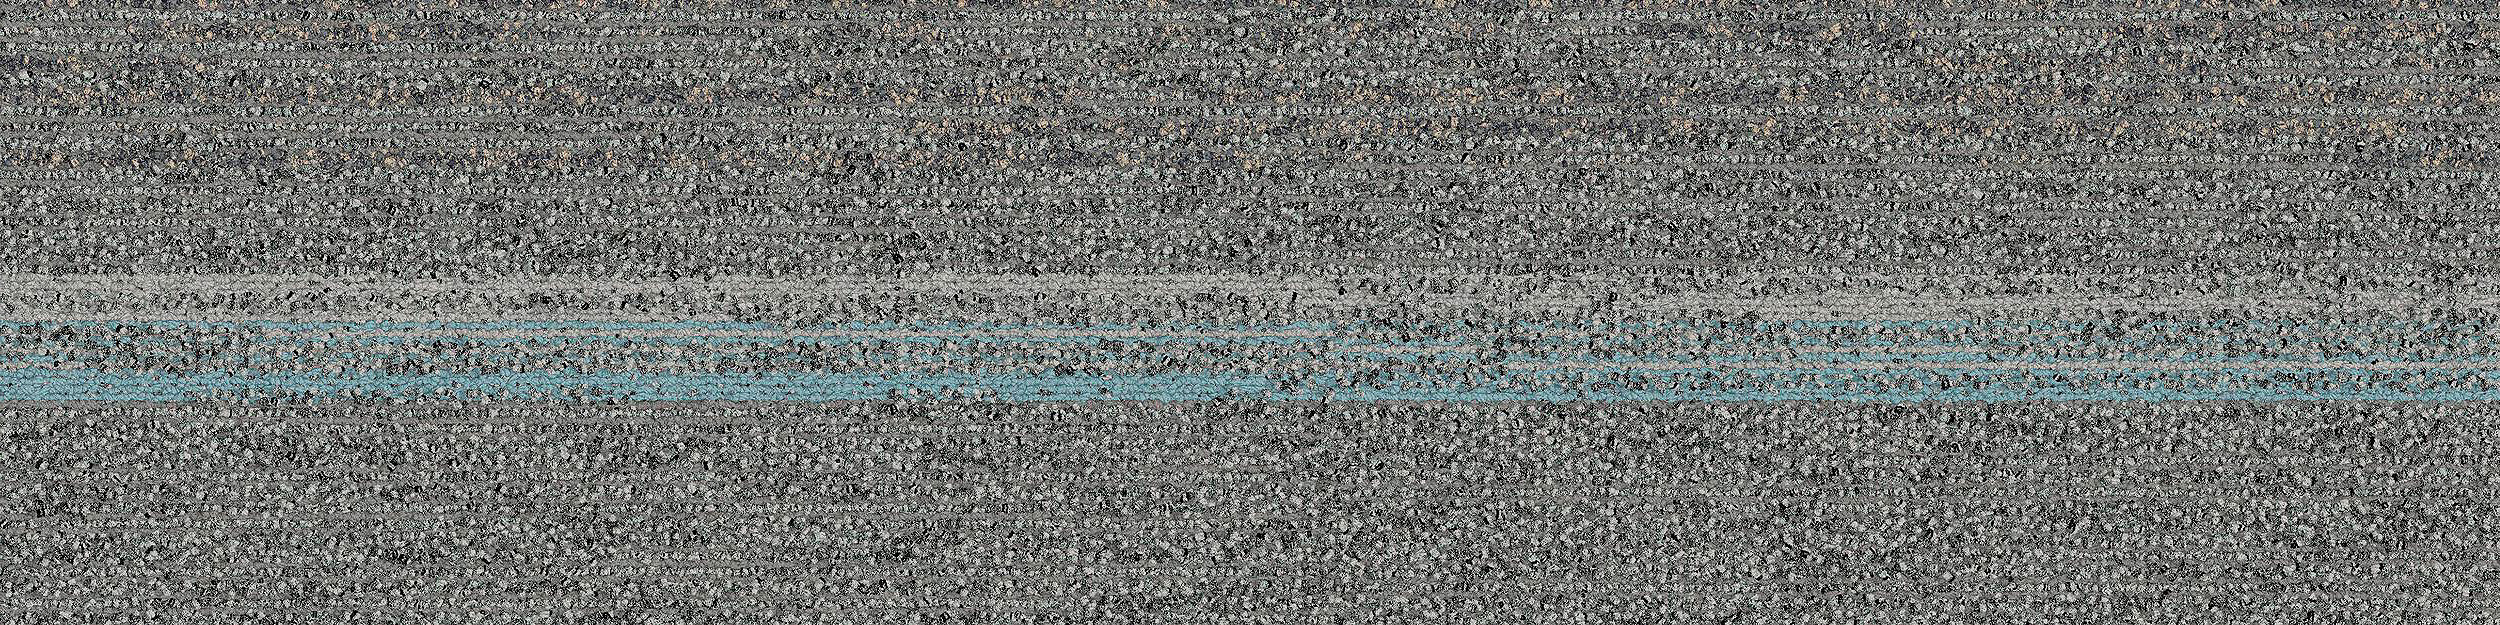 Ground Waves Carpet Tile in Pewter/Colors image number 6